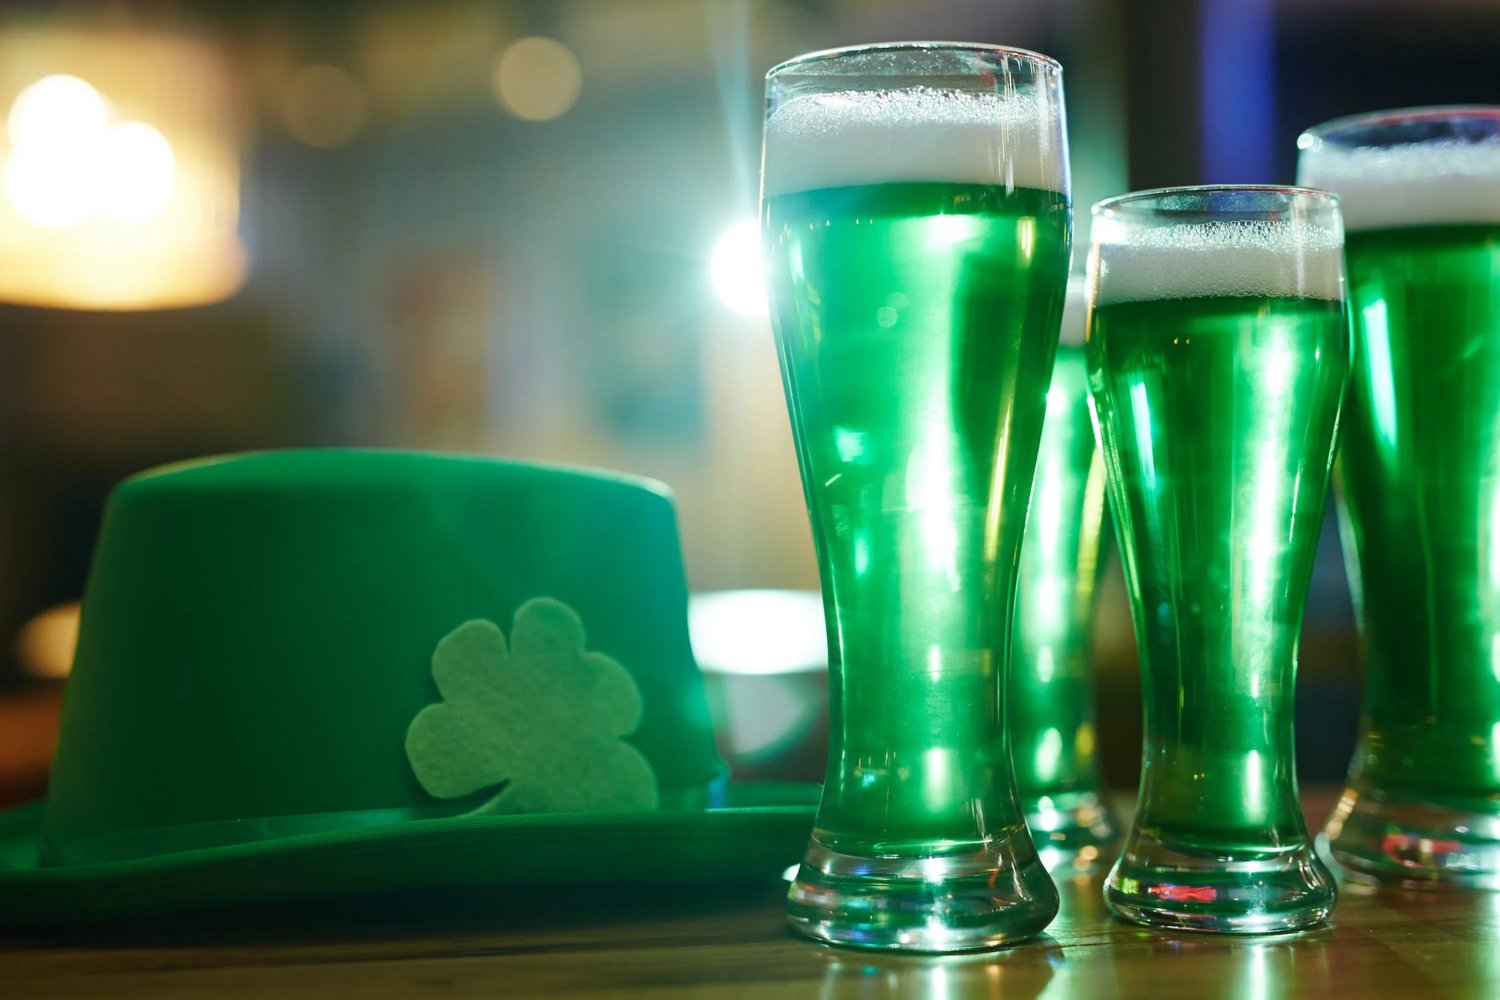 Celebrate St. Patrick's Day in the Lansing area with parties, live music, a scavenger hunt, an Irish play and more.